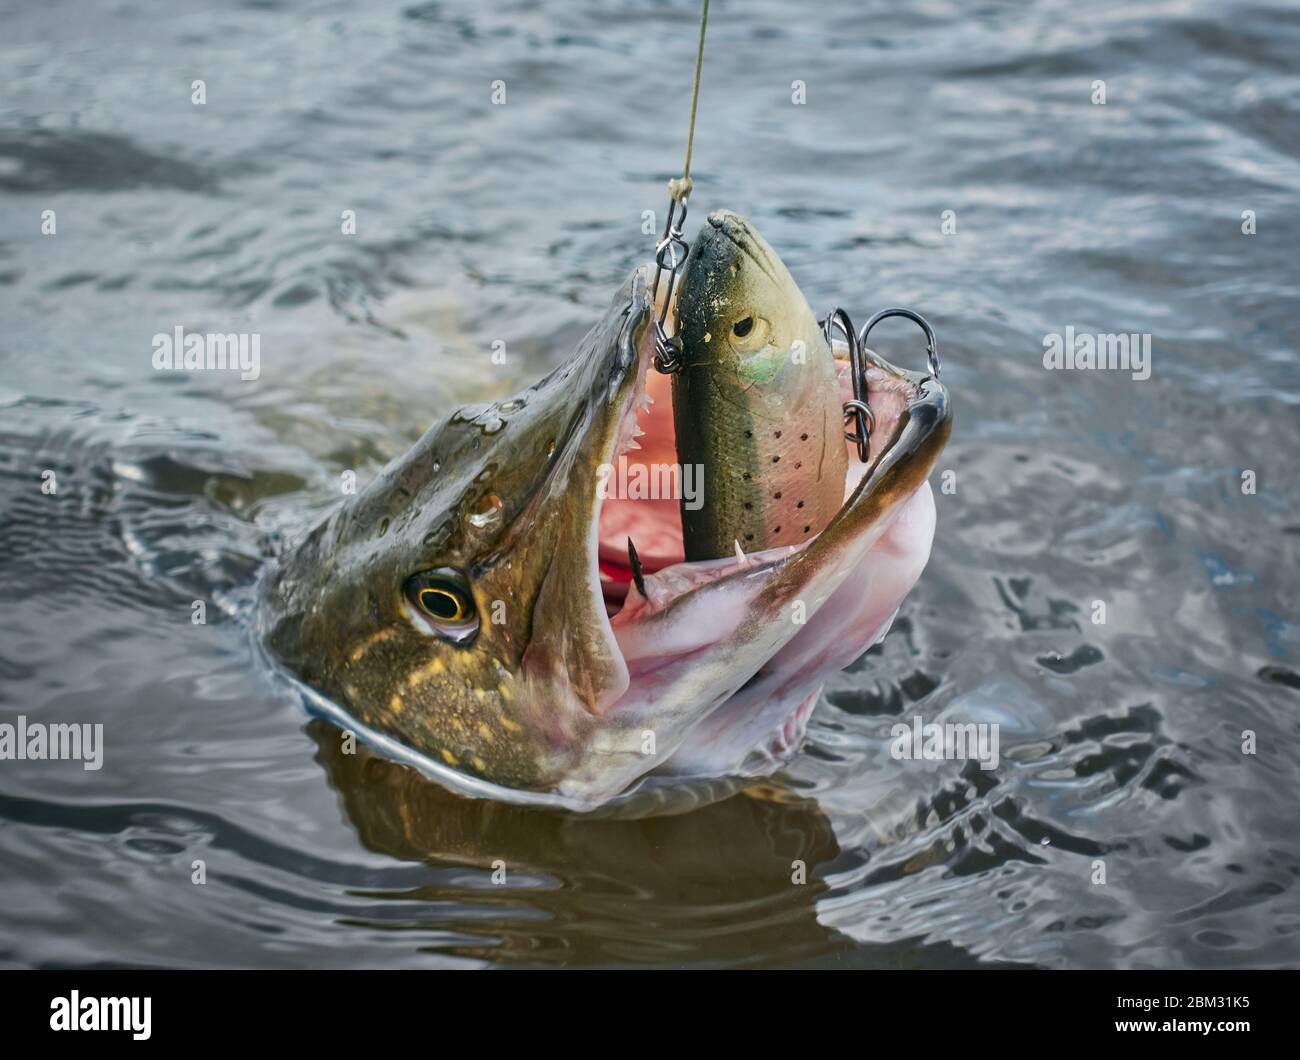 https://c8.alamy.com/comp/2BM31K5/large-size-northern-pike-strikes-softbait-lure-on-april-spring-day-just-before-spawning-time-on-a-lake-in-southern-finland-2BM31K5.jpg